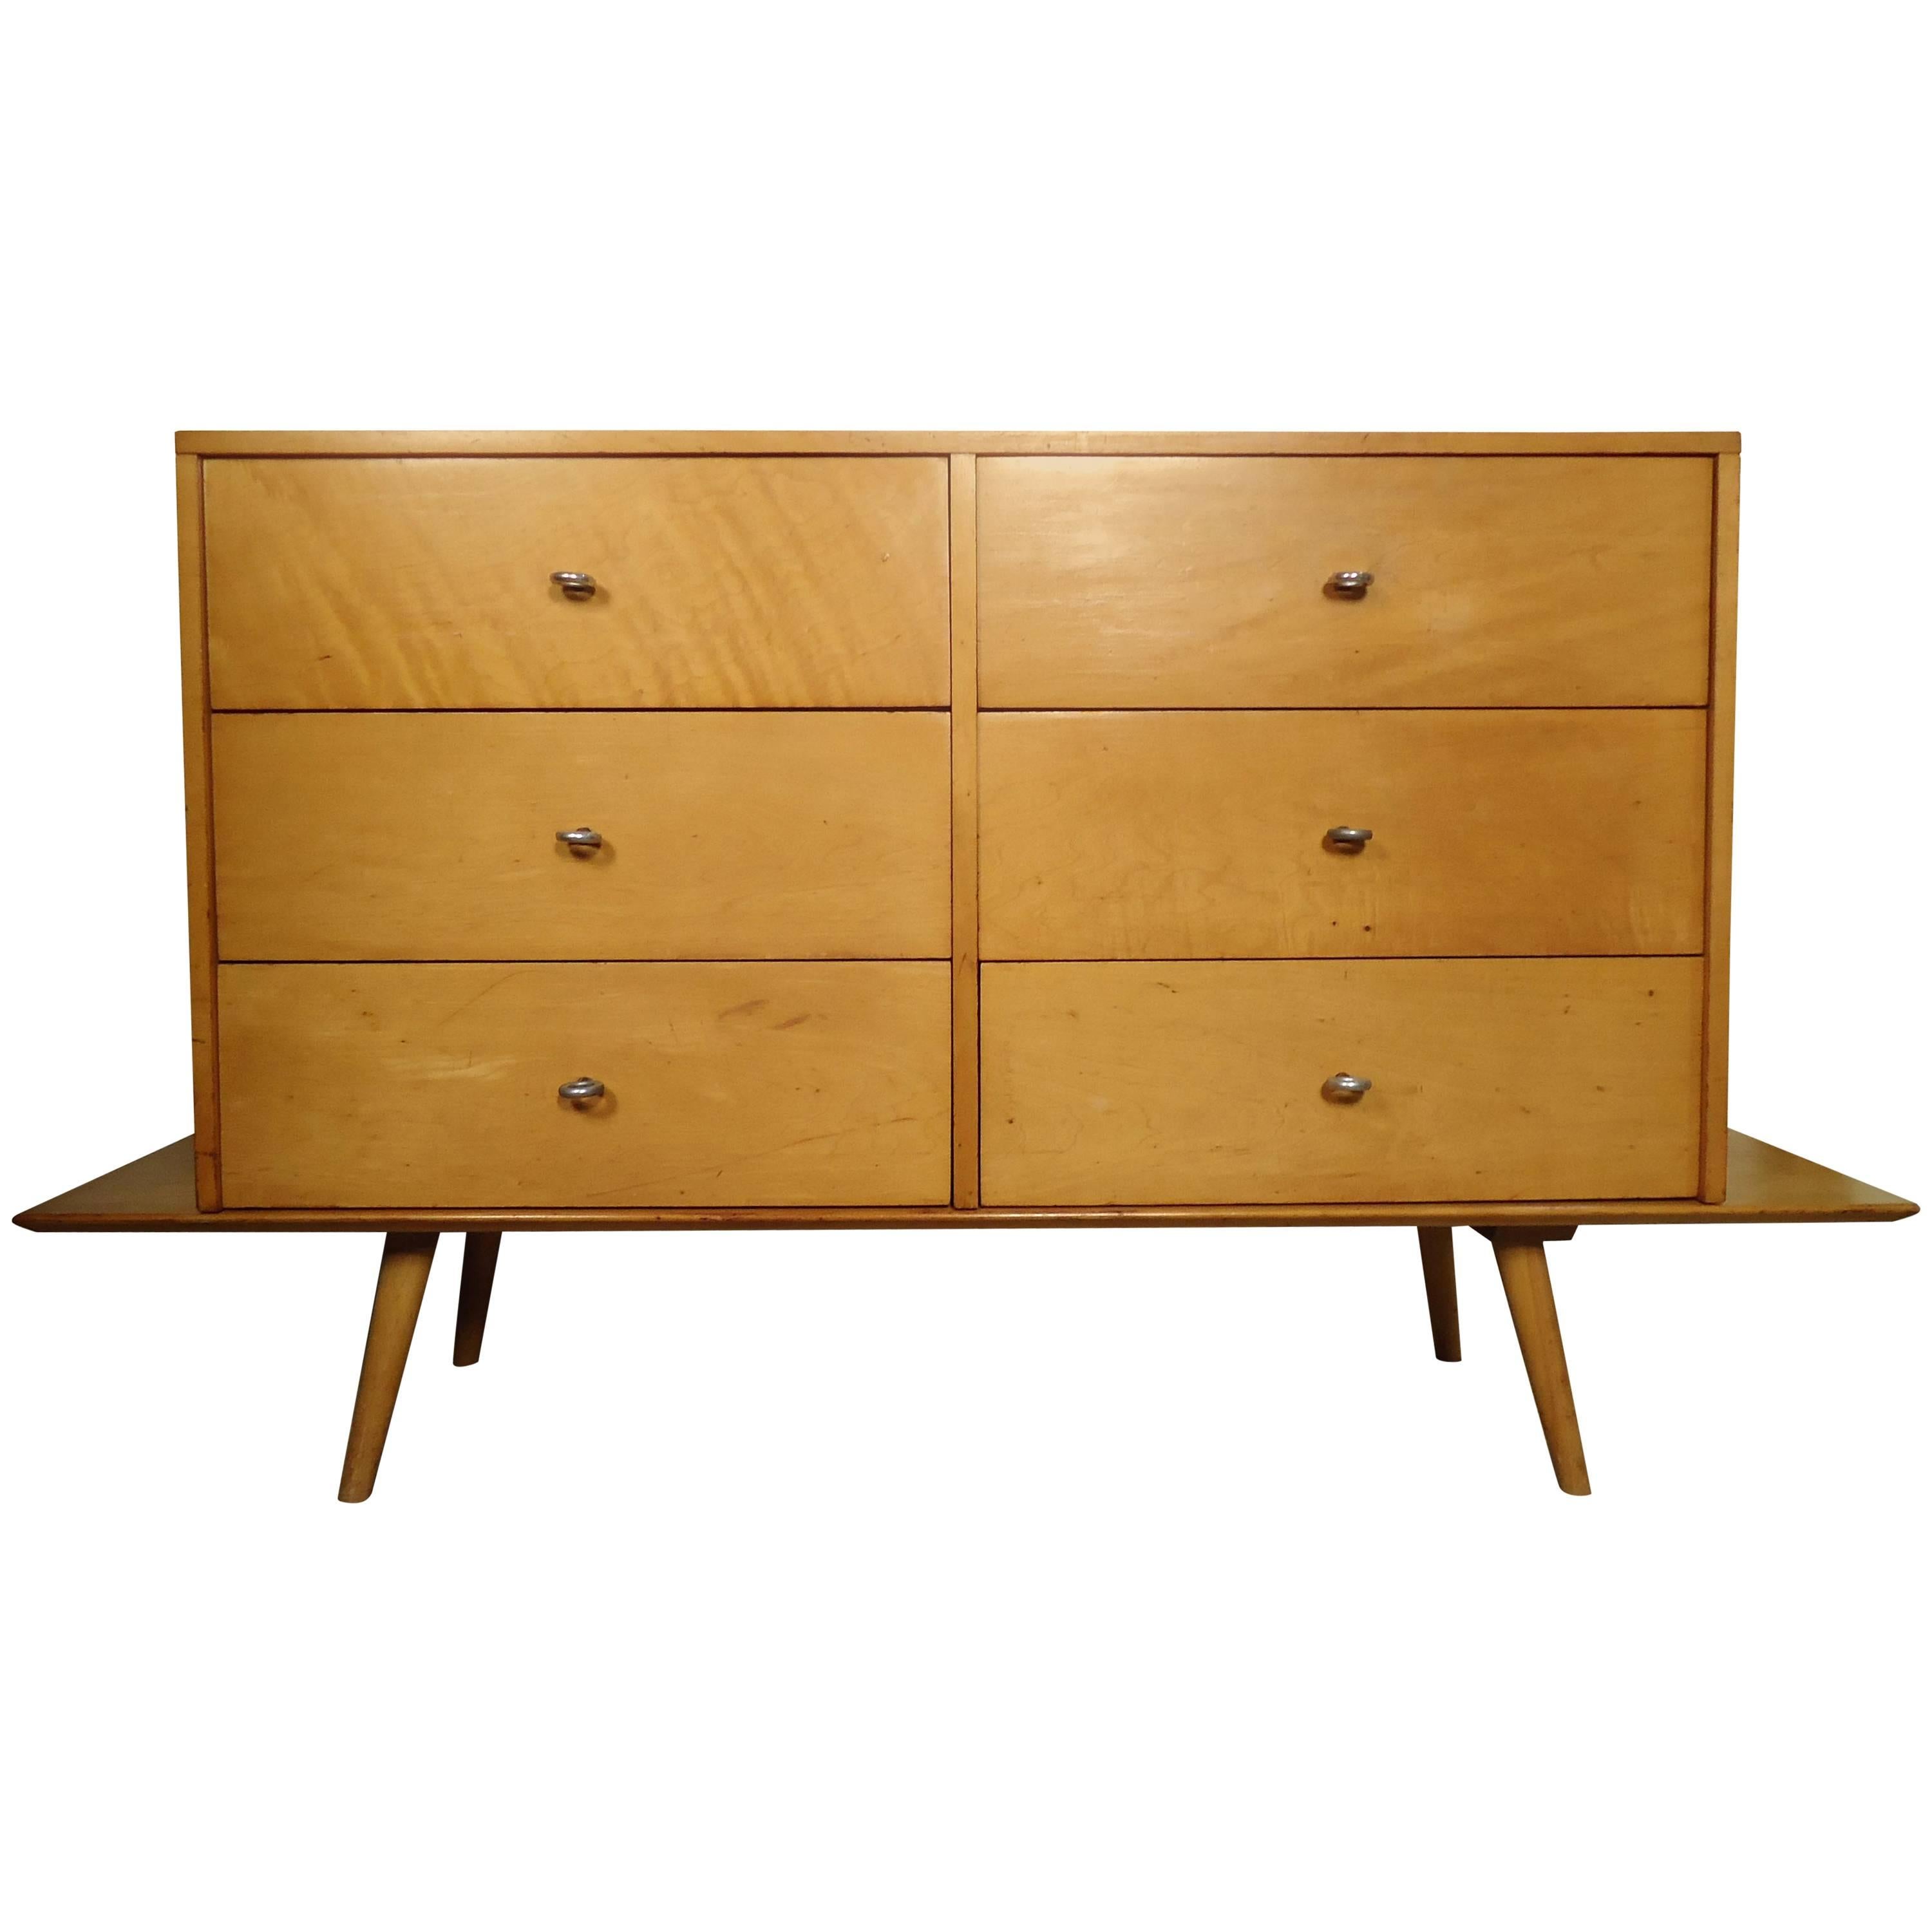 Midcentury Paul McCobb Dresser and Matching Table Base